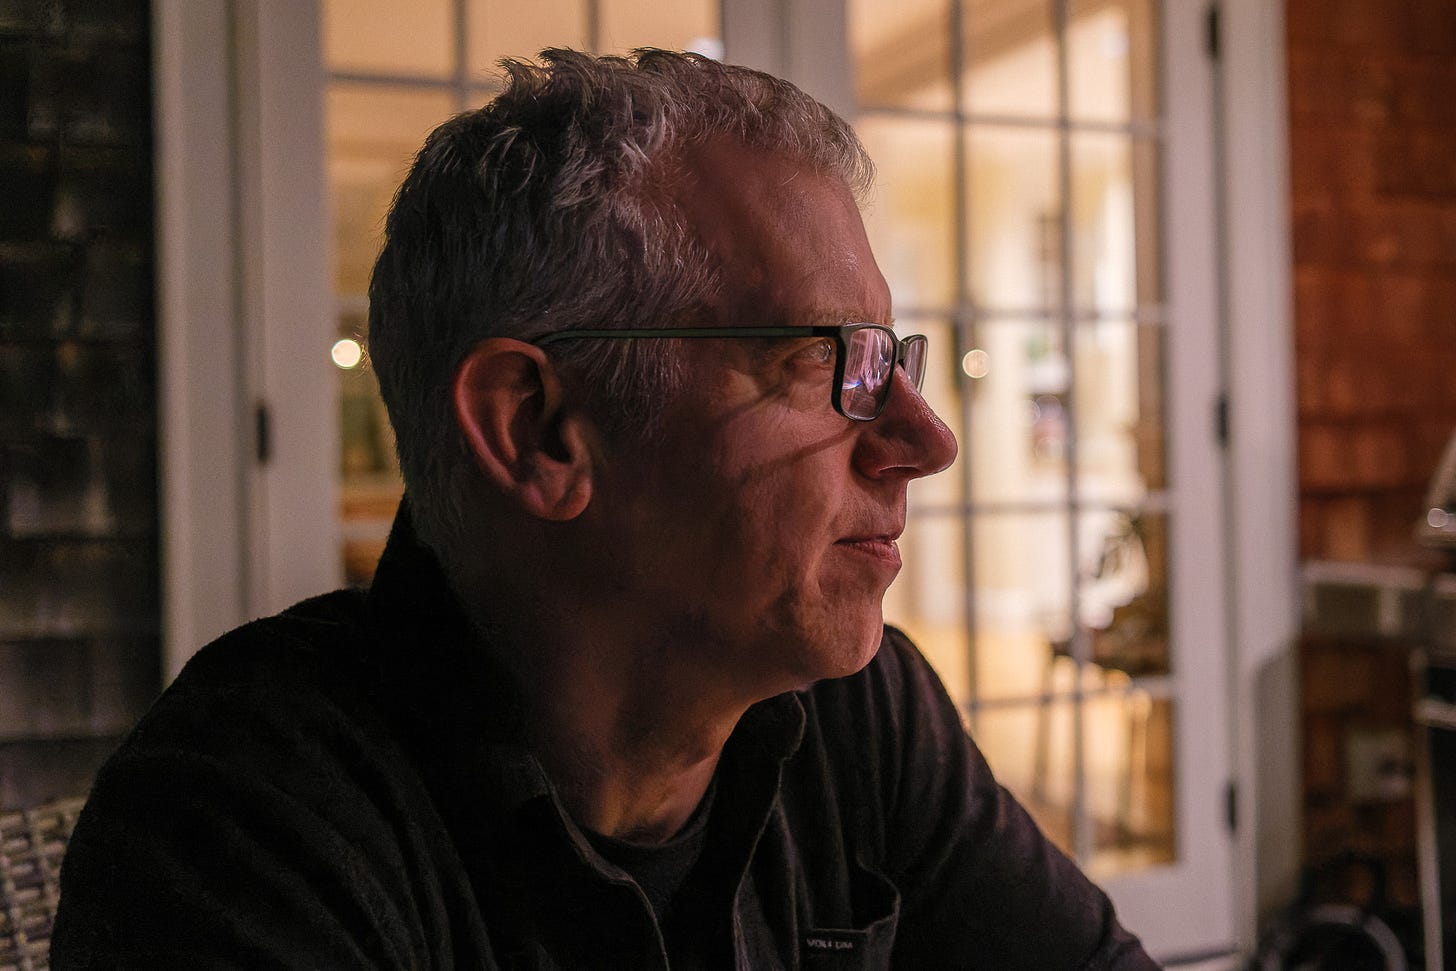 Profile photo of a man listening to a conversation late at night outside on a deck, head and shoulders framing, with the illuminated interior of a house in the background.